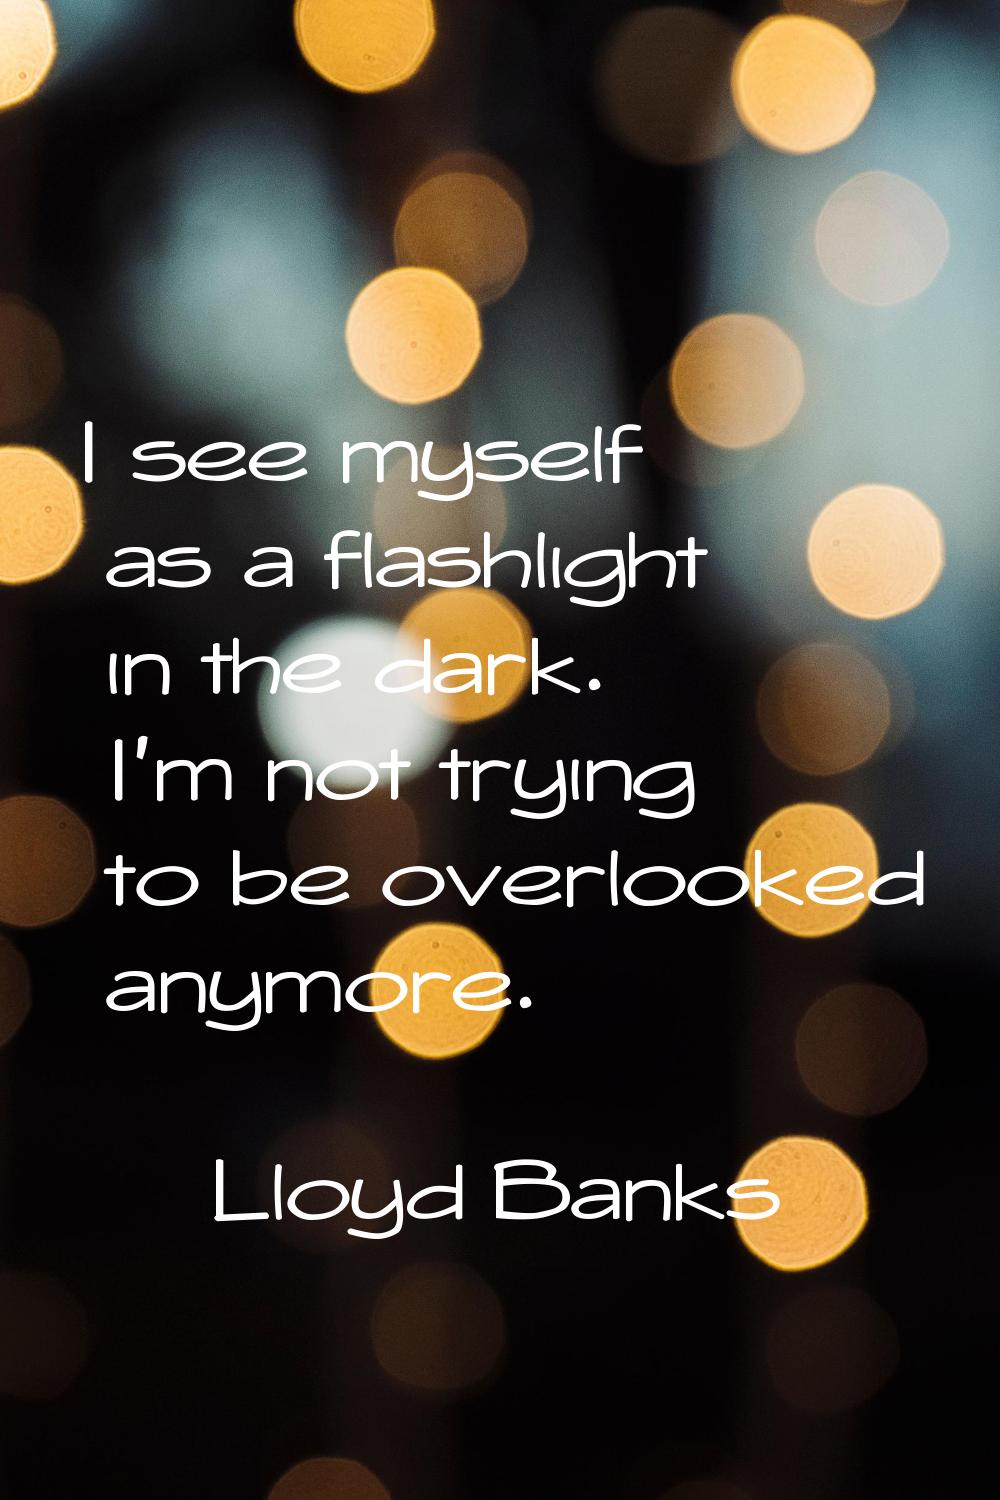 I see myself as a flashlight in the dark. I'm not trying to be overlooked anymore.